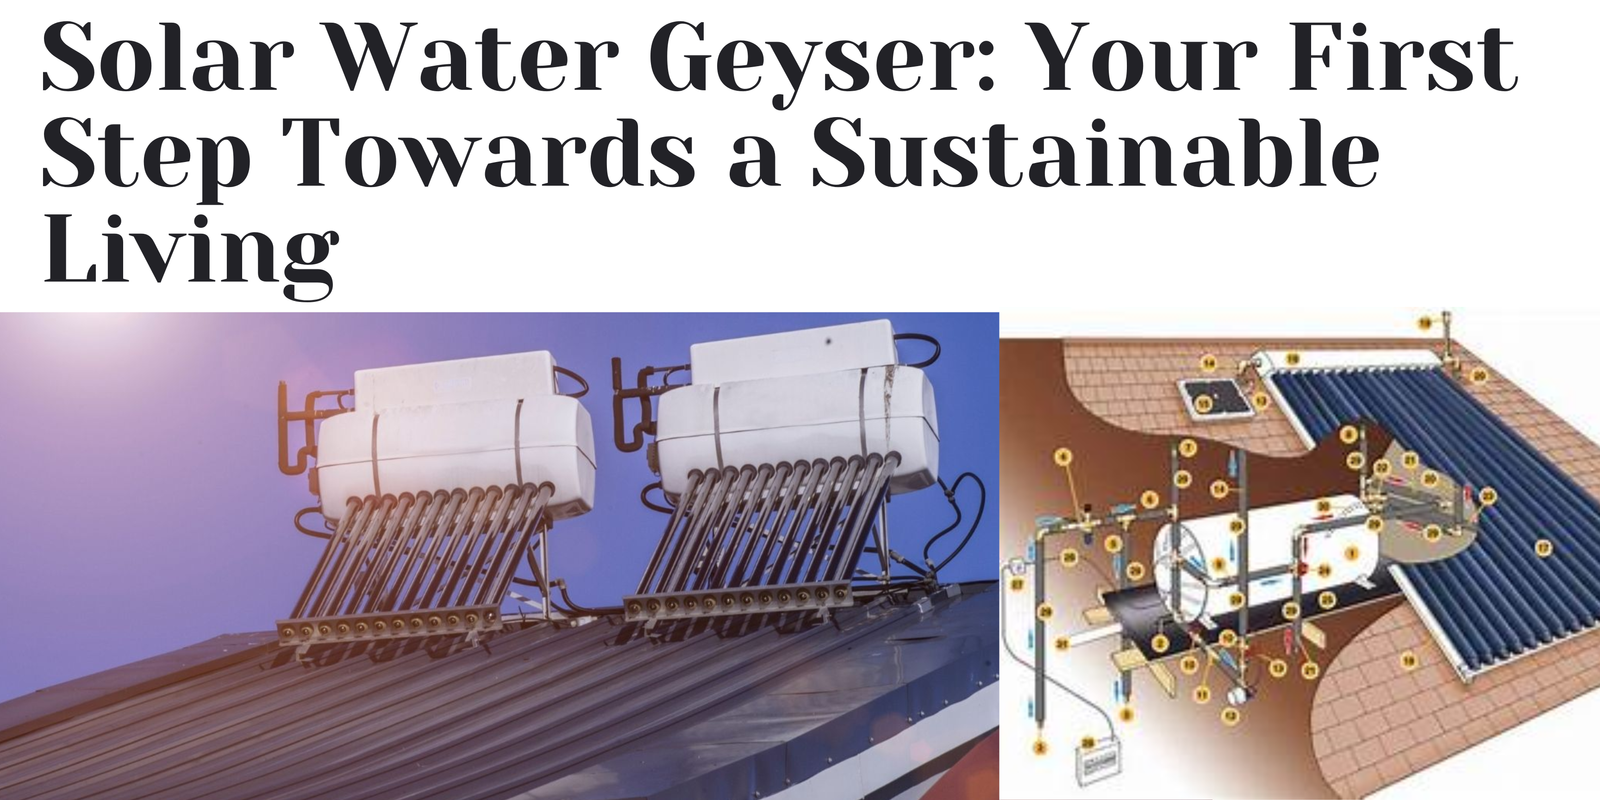 Solar Water Geyser: Your First Step Towards a Sustainable Living